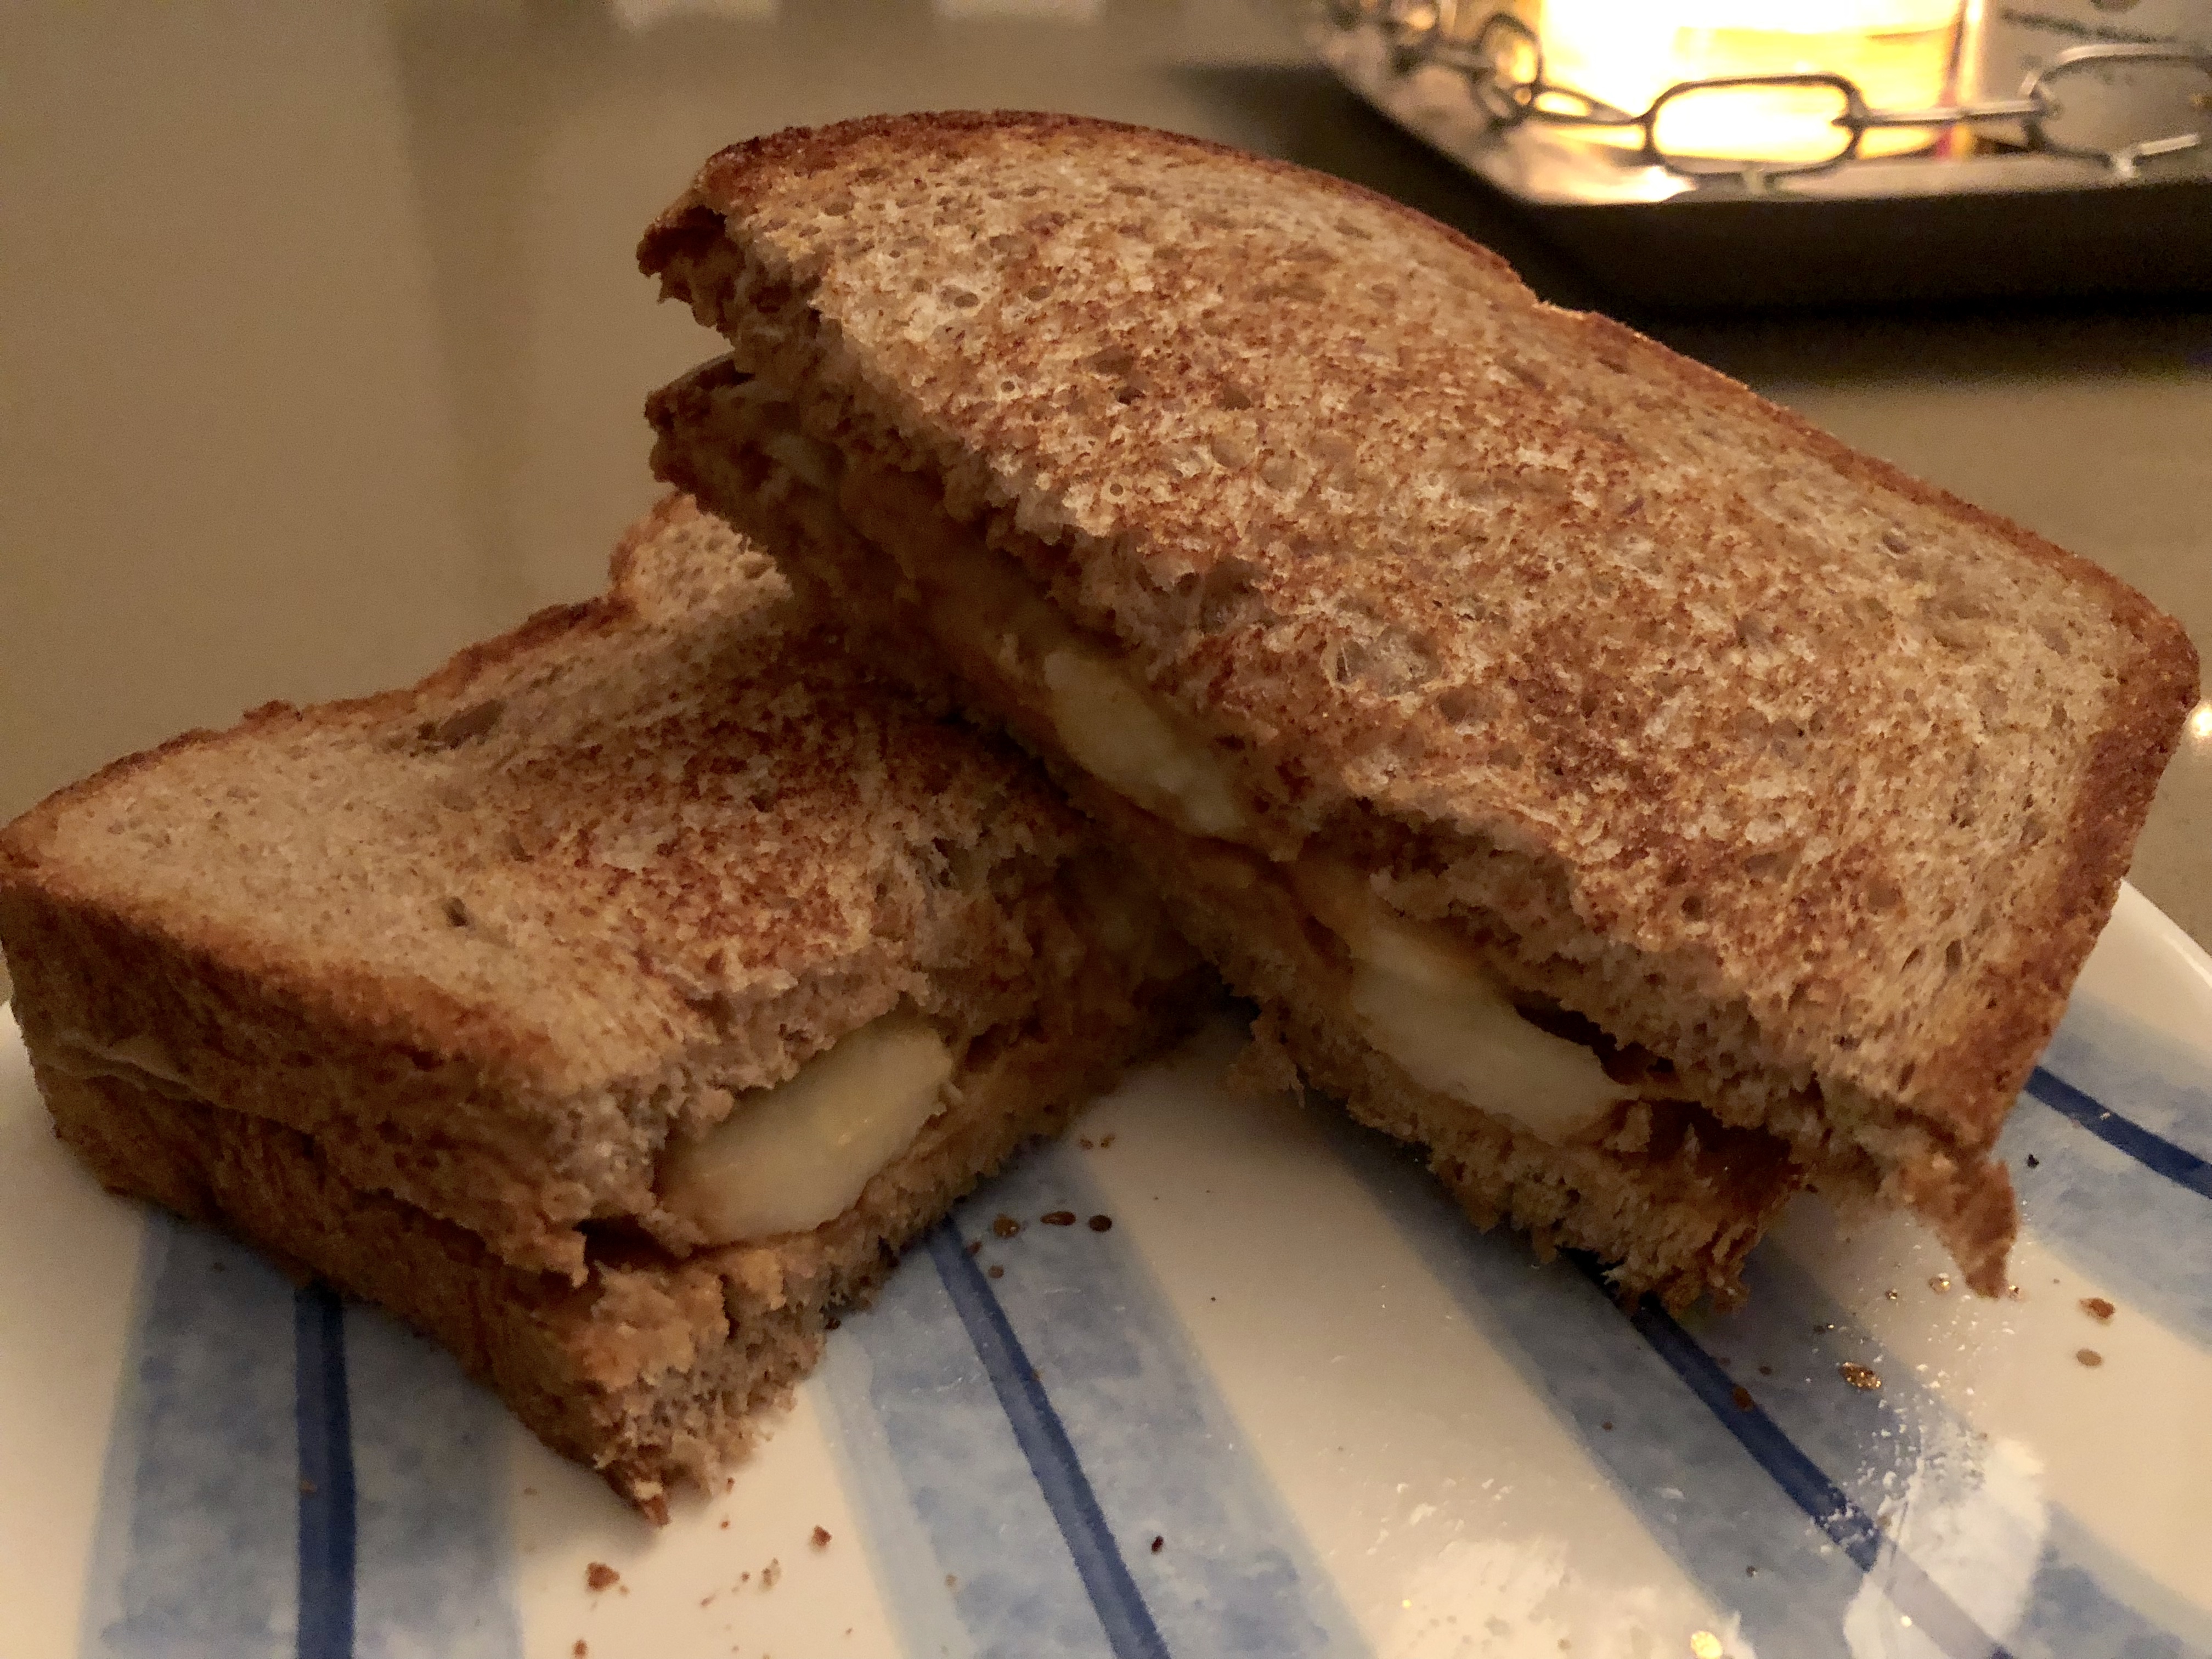 Grilled Peanut Butter and Banana Sandwich | Allrecipes